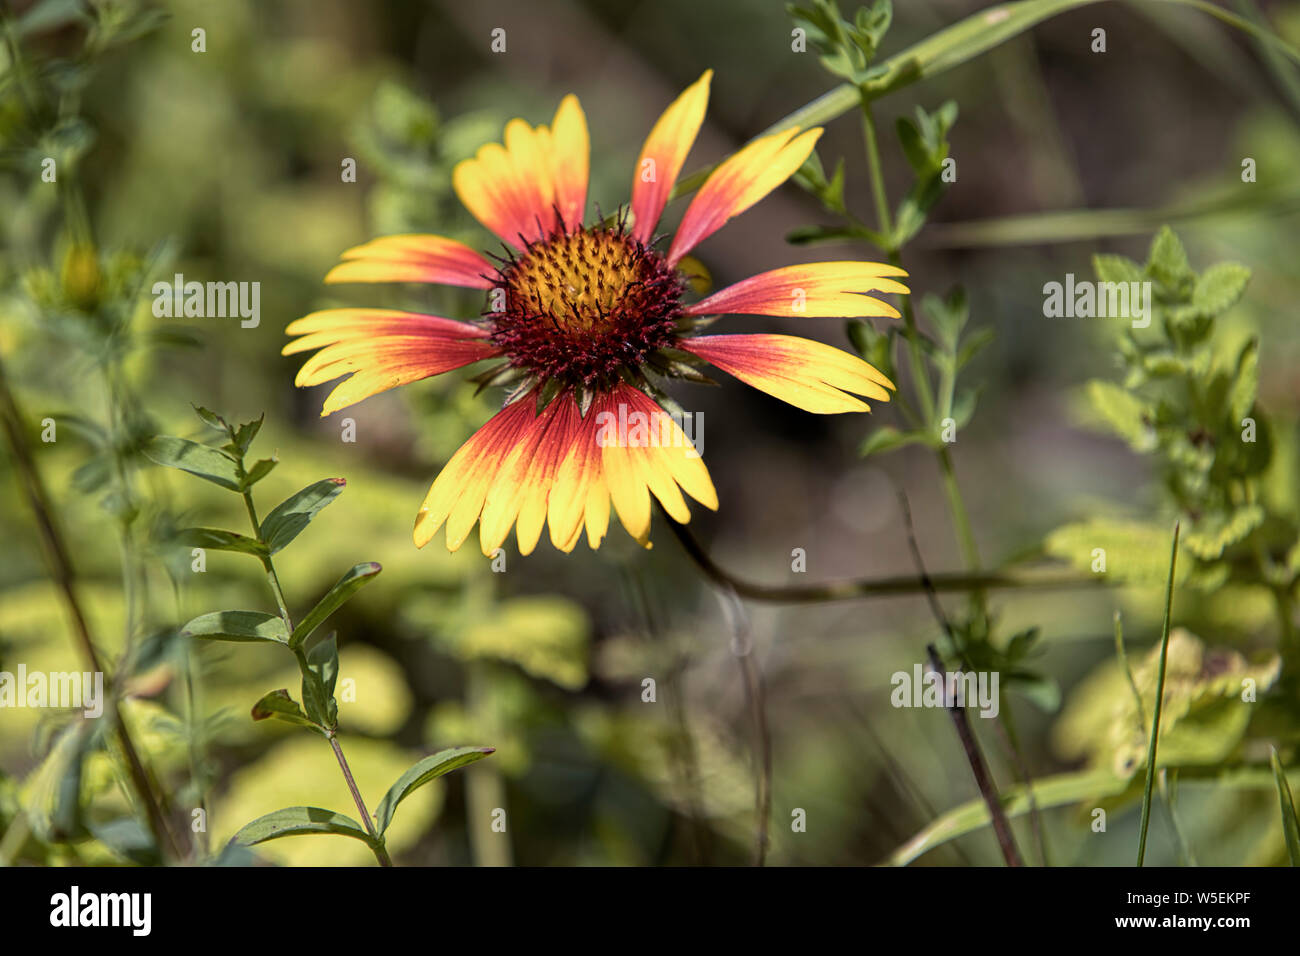 A close up photo of a delicate red and yellow coneflower in a garden. Stock Photo